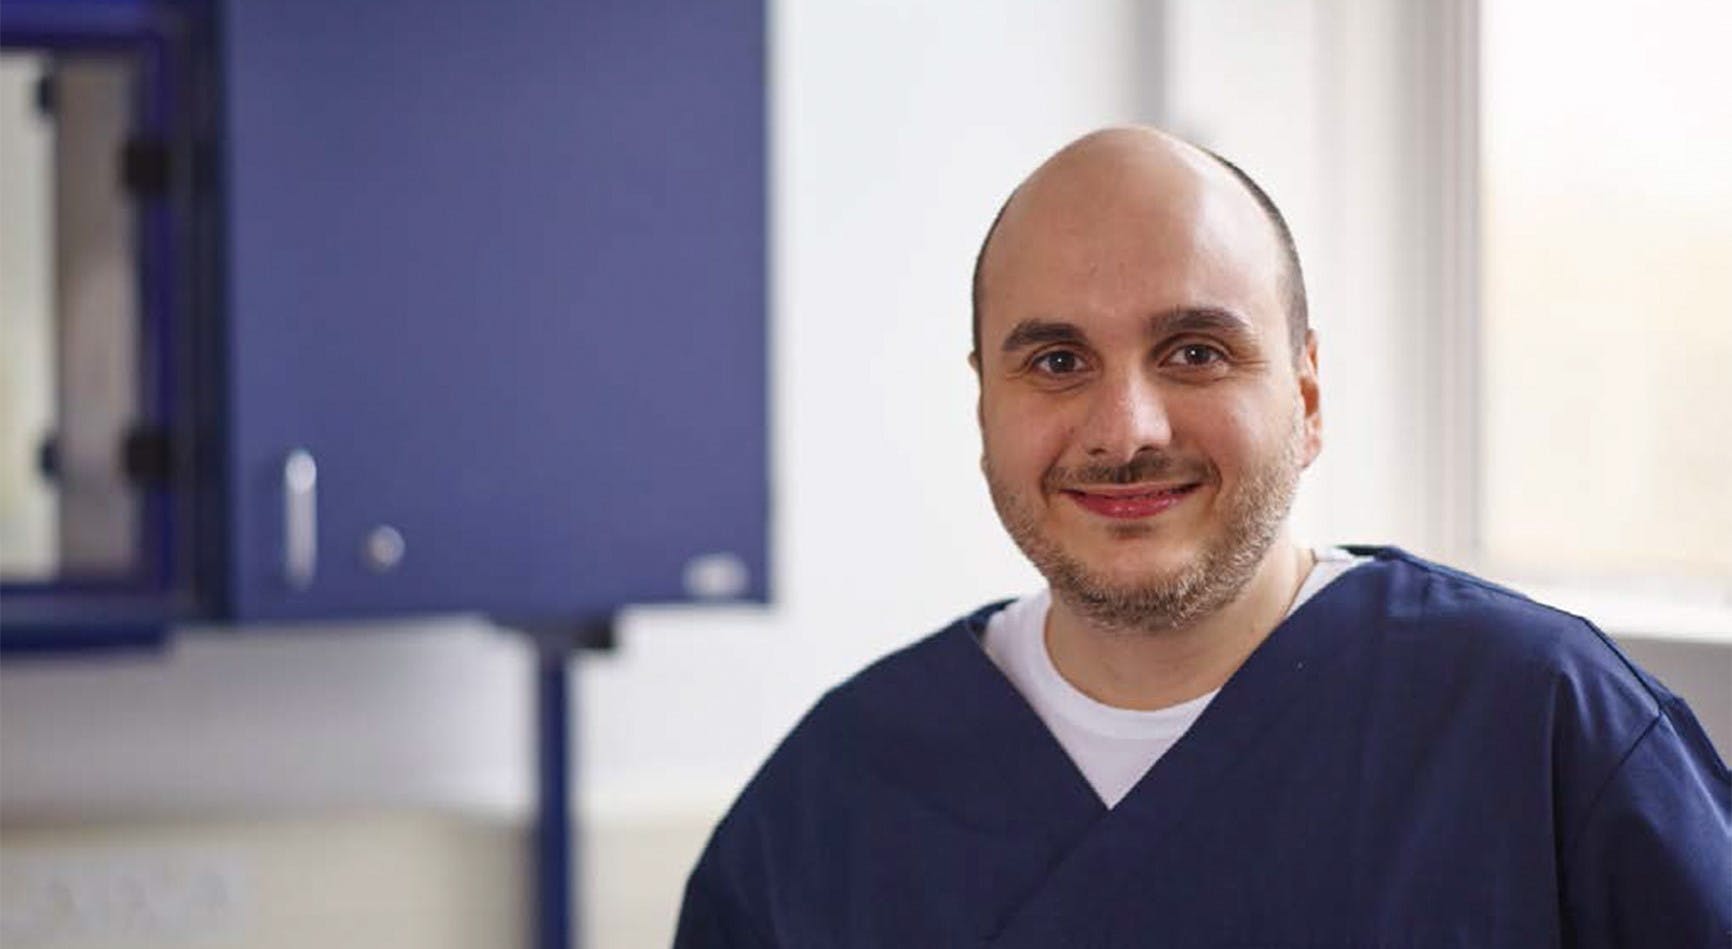 Dentist dressed in scrubs smiles directly at camera